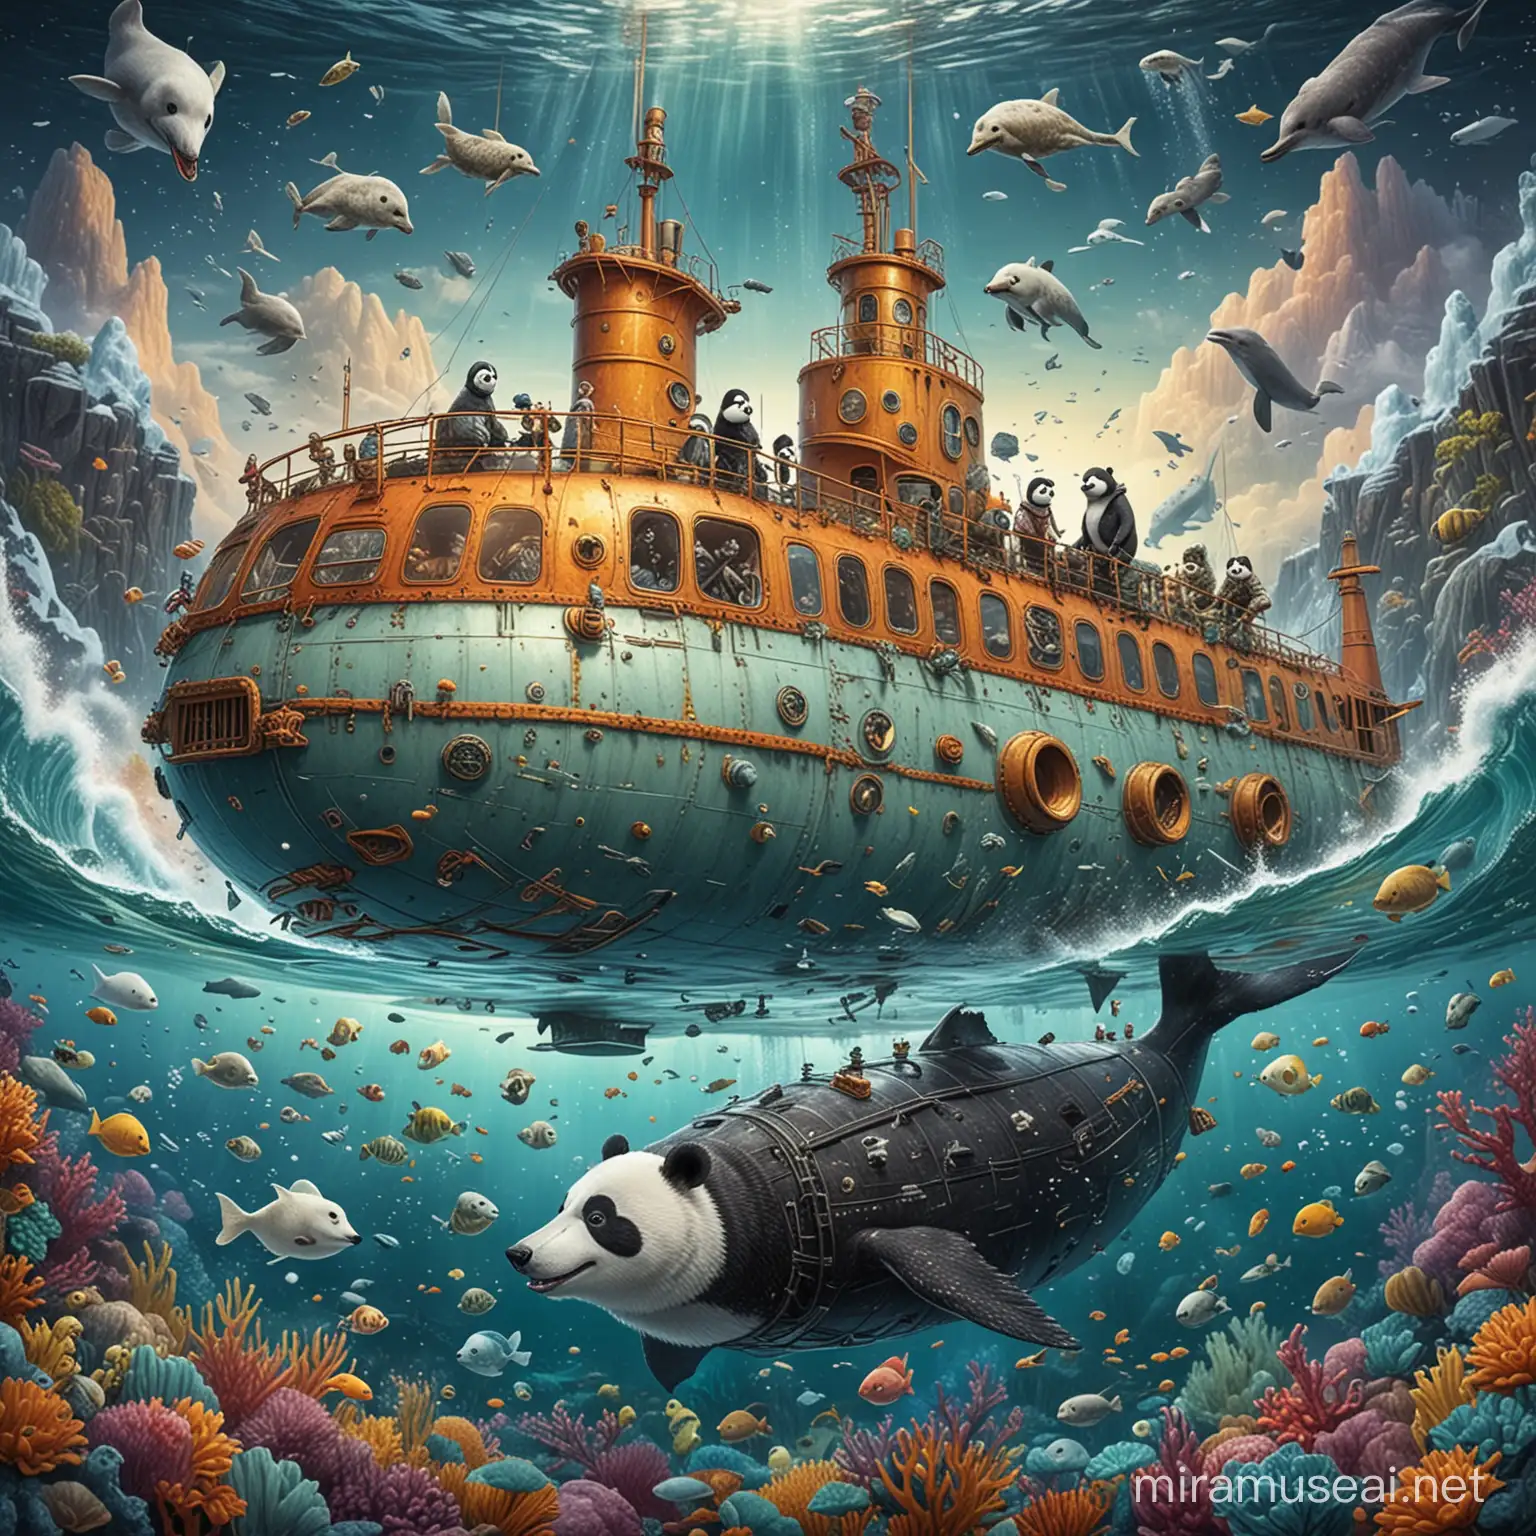 A whimsical and imaginative rendering of a penguin, duck, polar bear, and panda exploring the ocean in a fantastical submarine, complete with intricate details and vibrant colors.